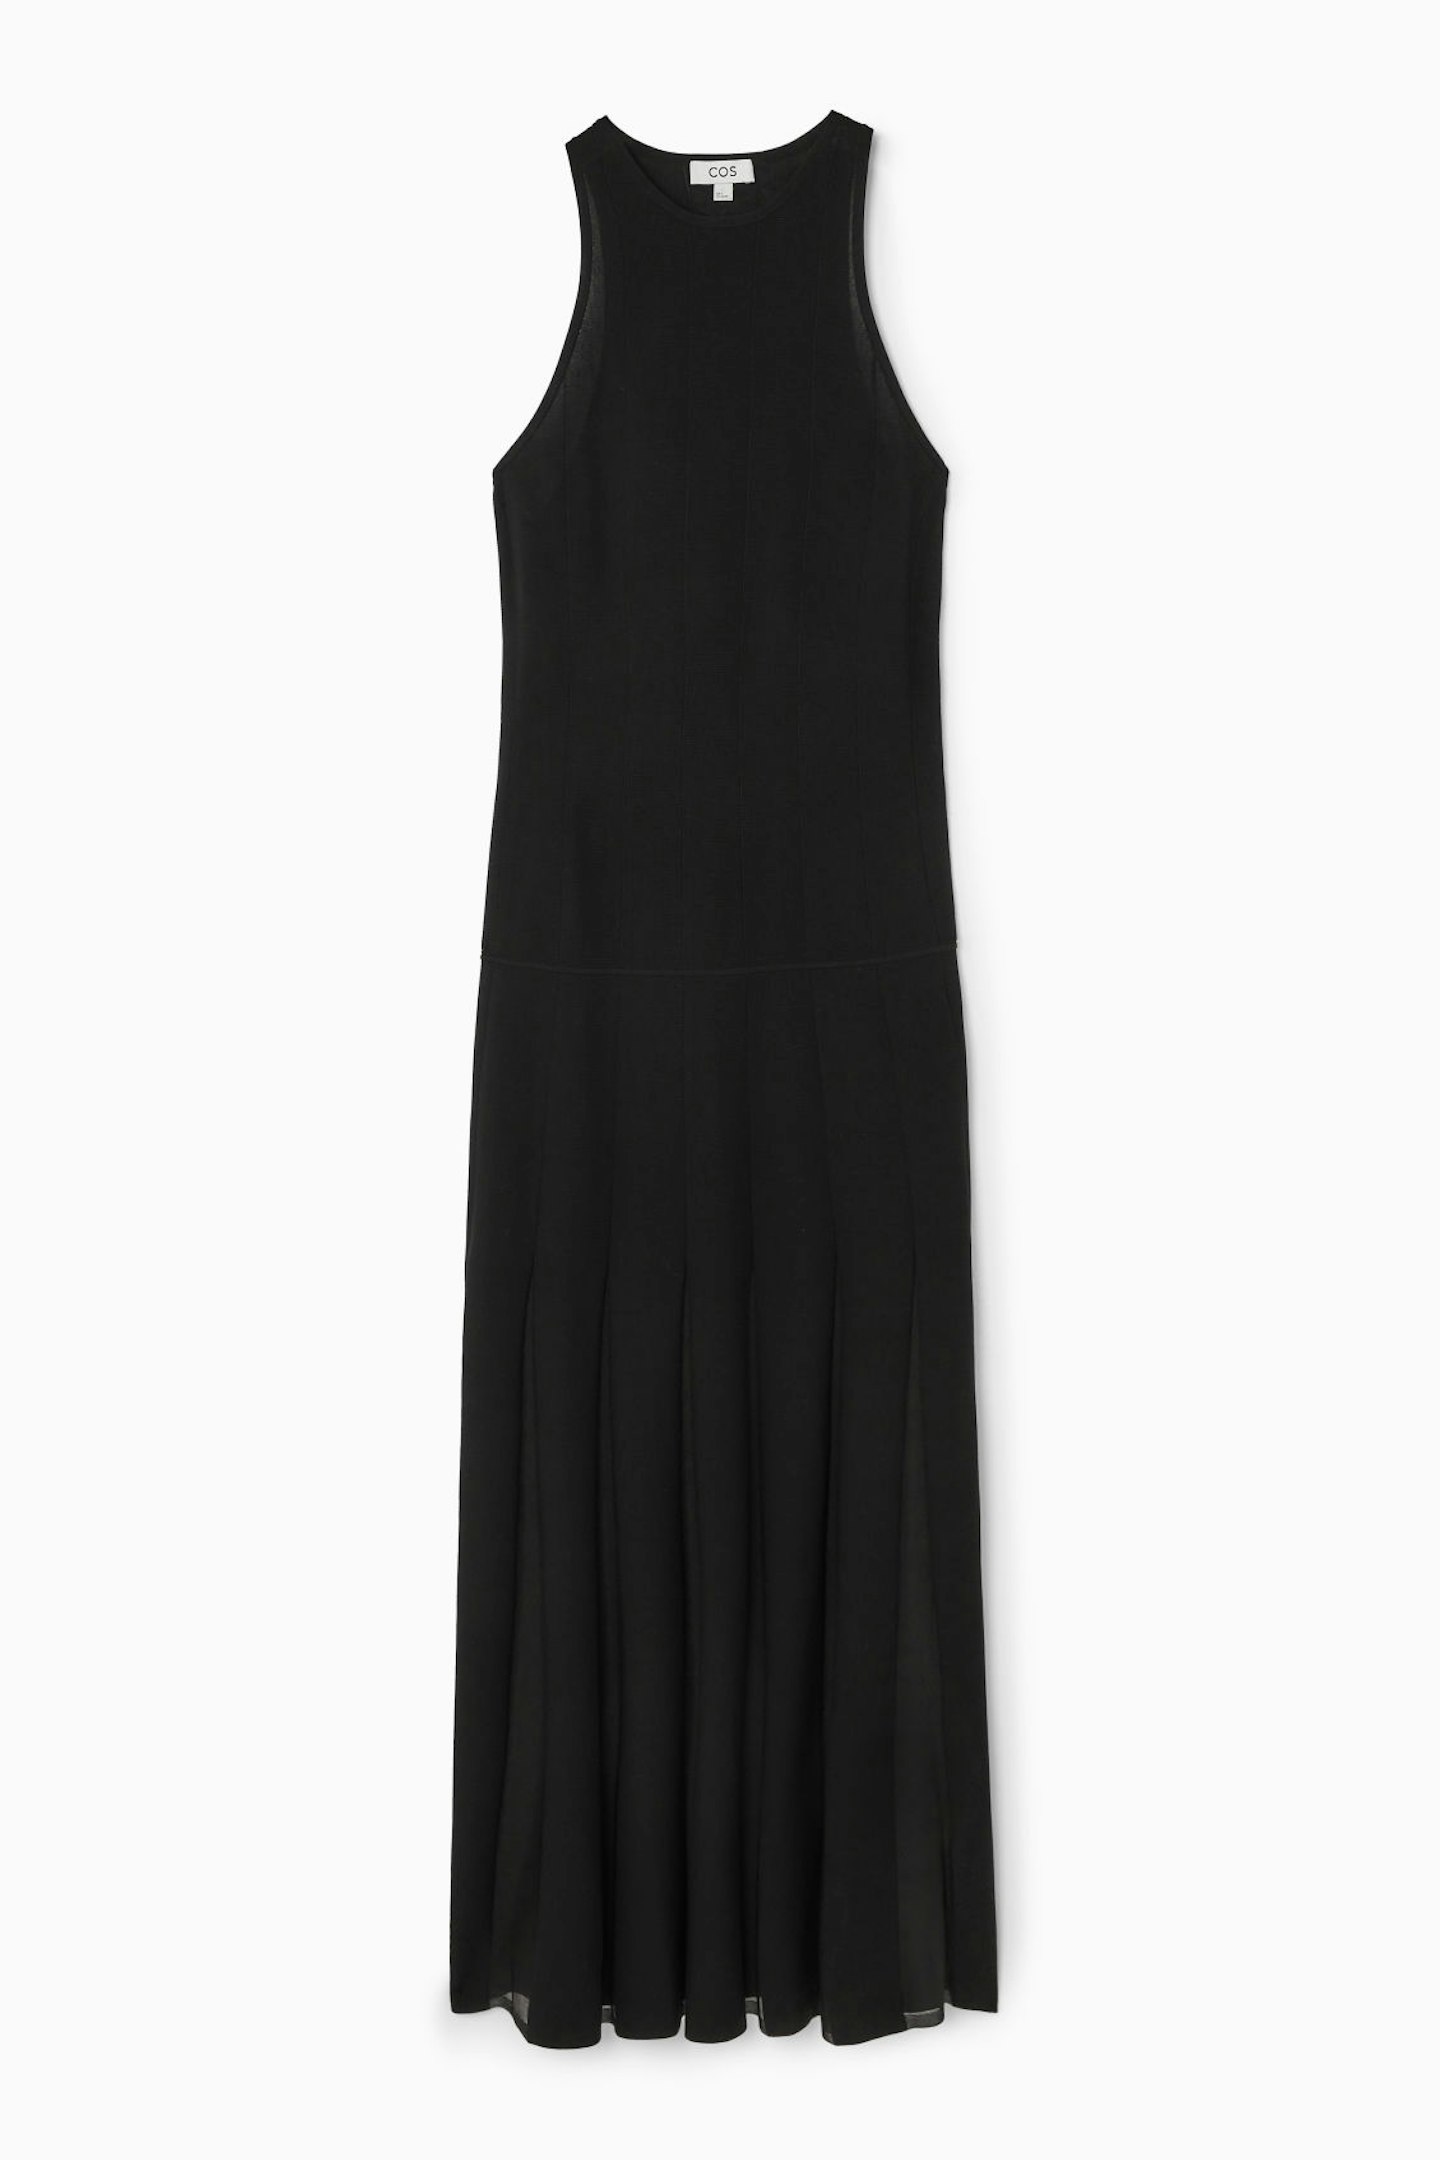 COS, Pleated Racer-Neck Maxi Dress